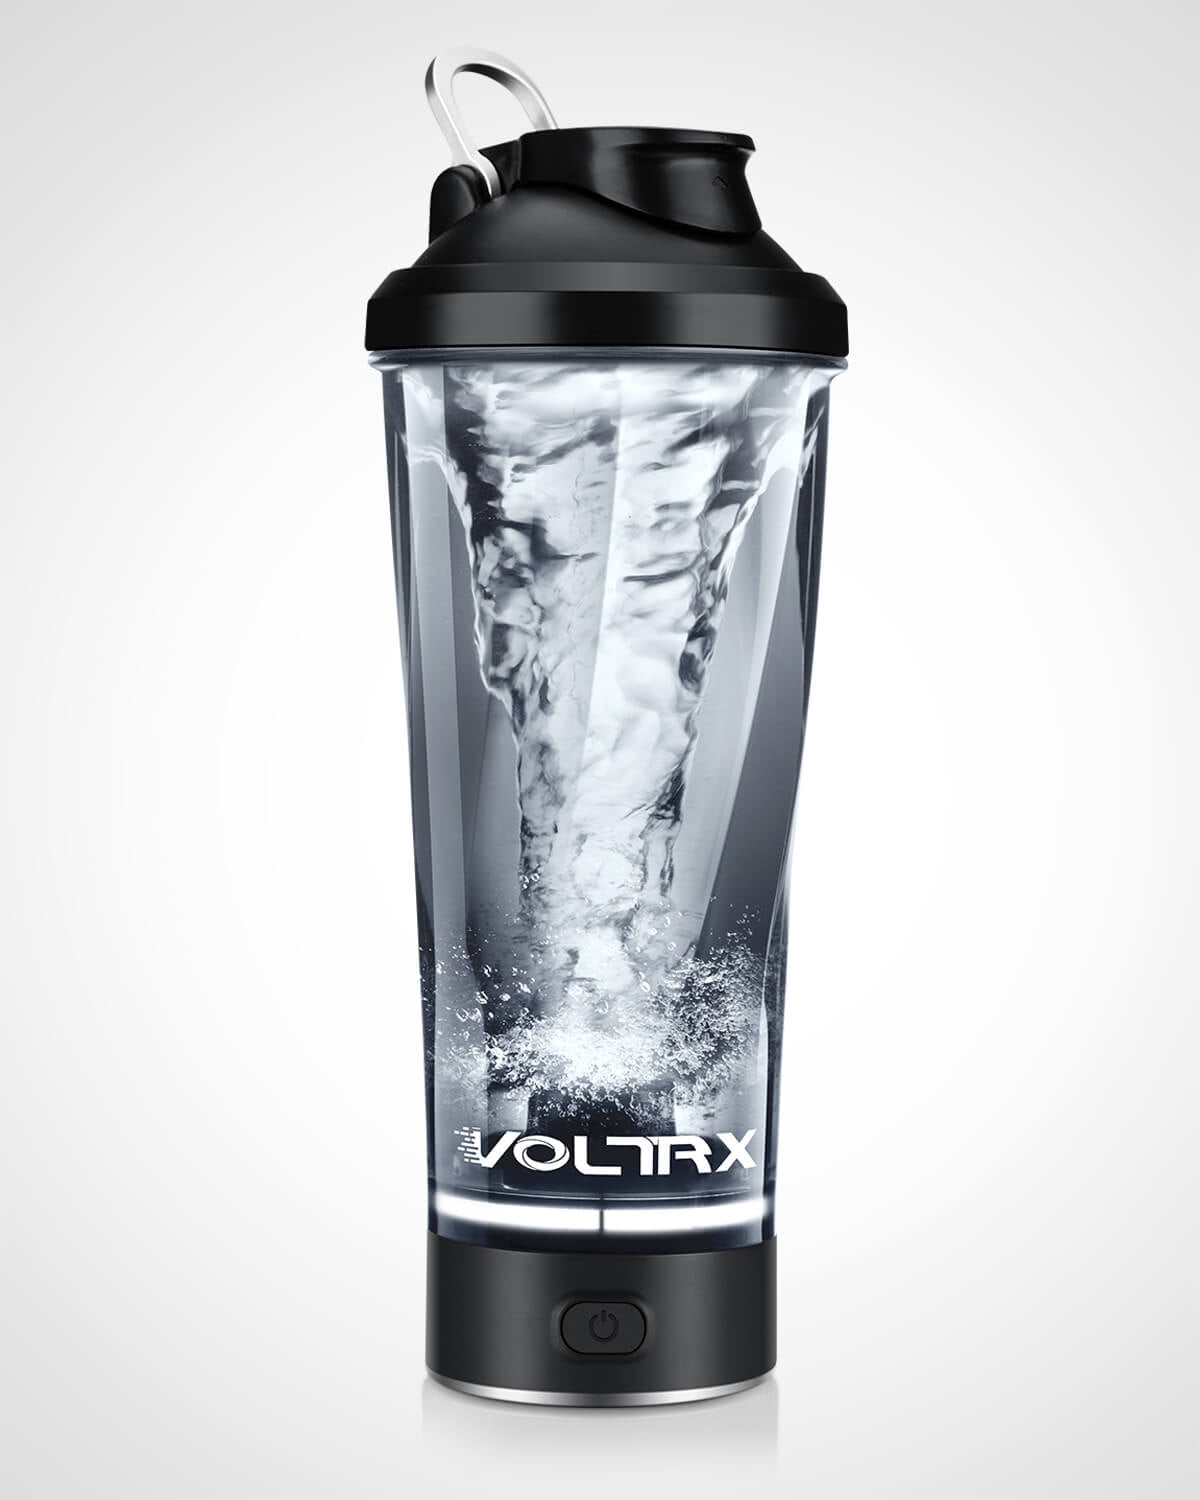 VOLTRX Premium Electric Protein Shaker Bottle, Made with Tritan - BPA Free  - 24 oz Vortex Portable Mixer Cup/USB C Rechargeable Shaker Cups for